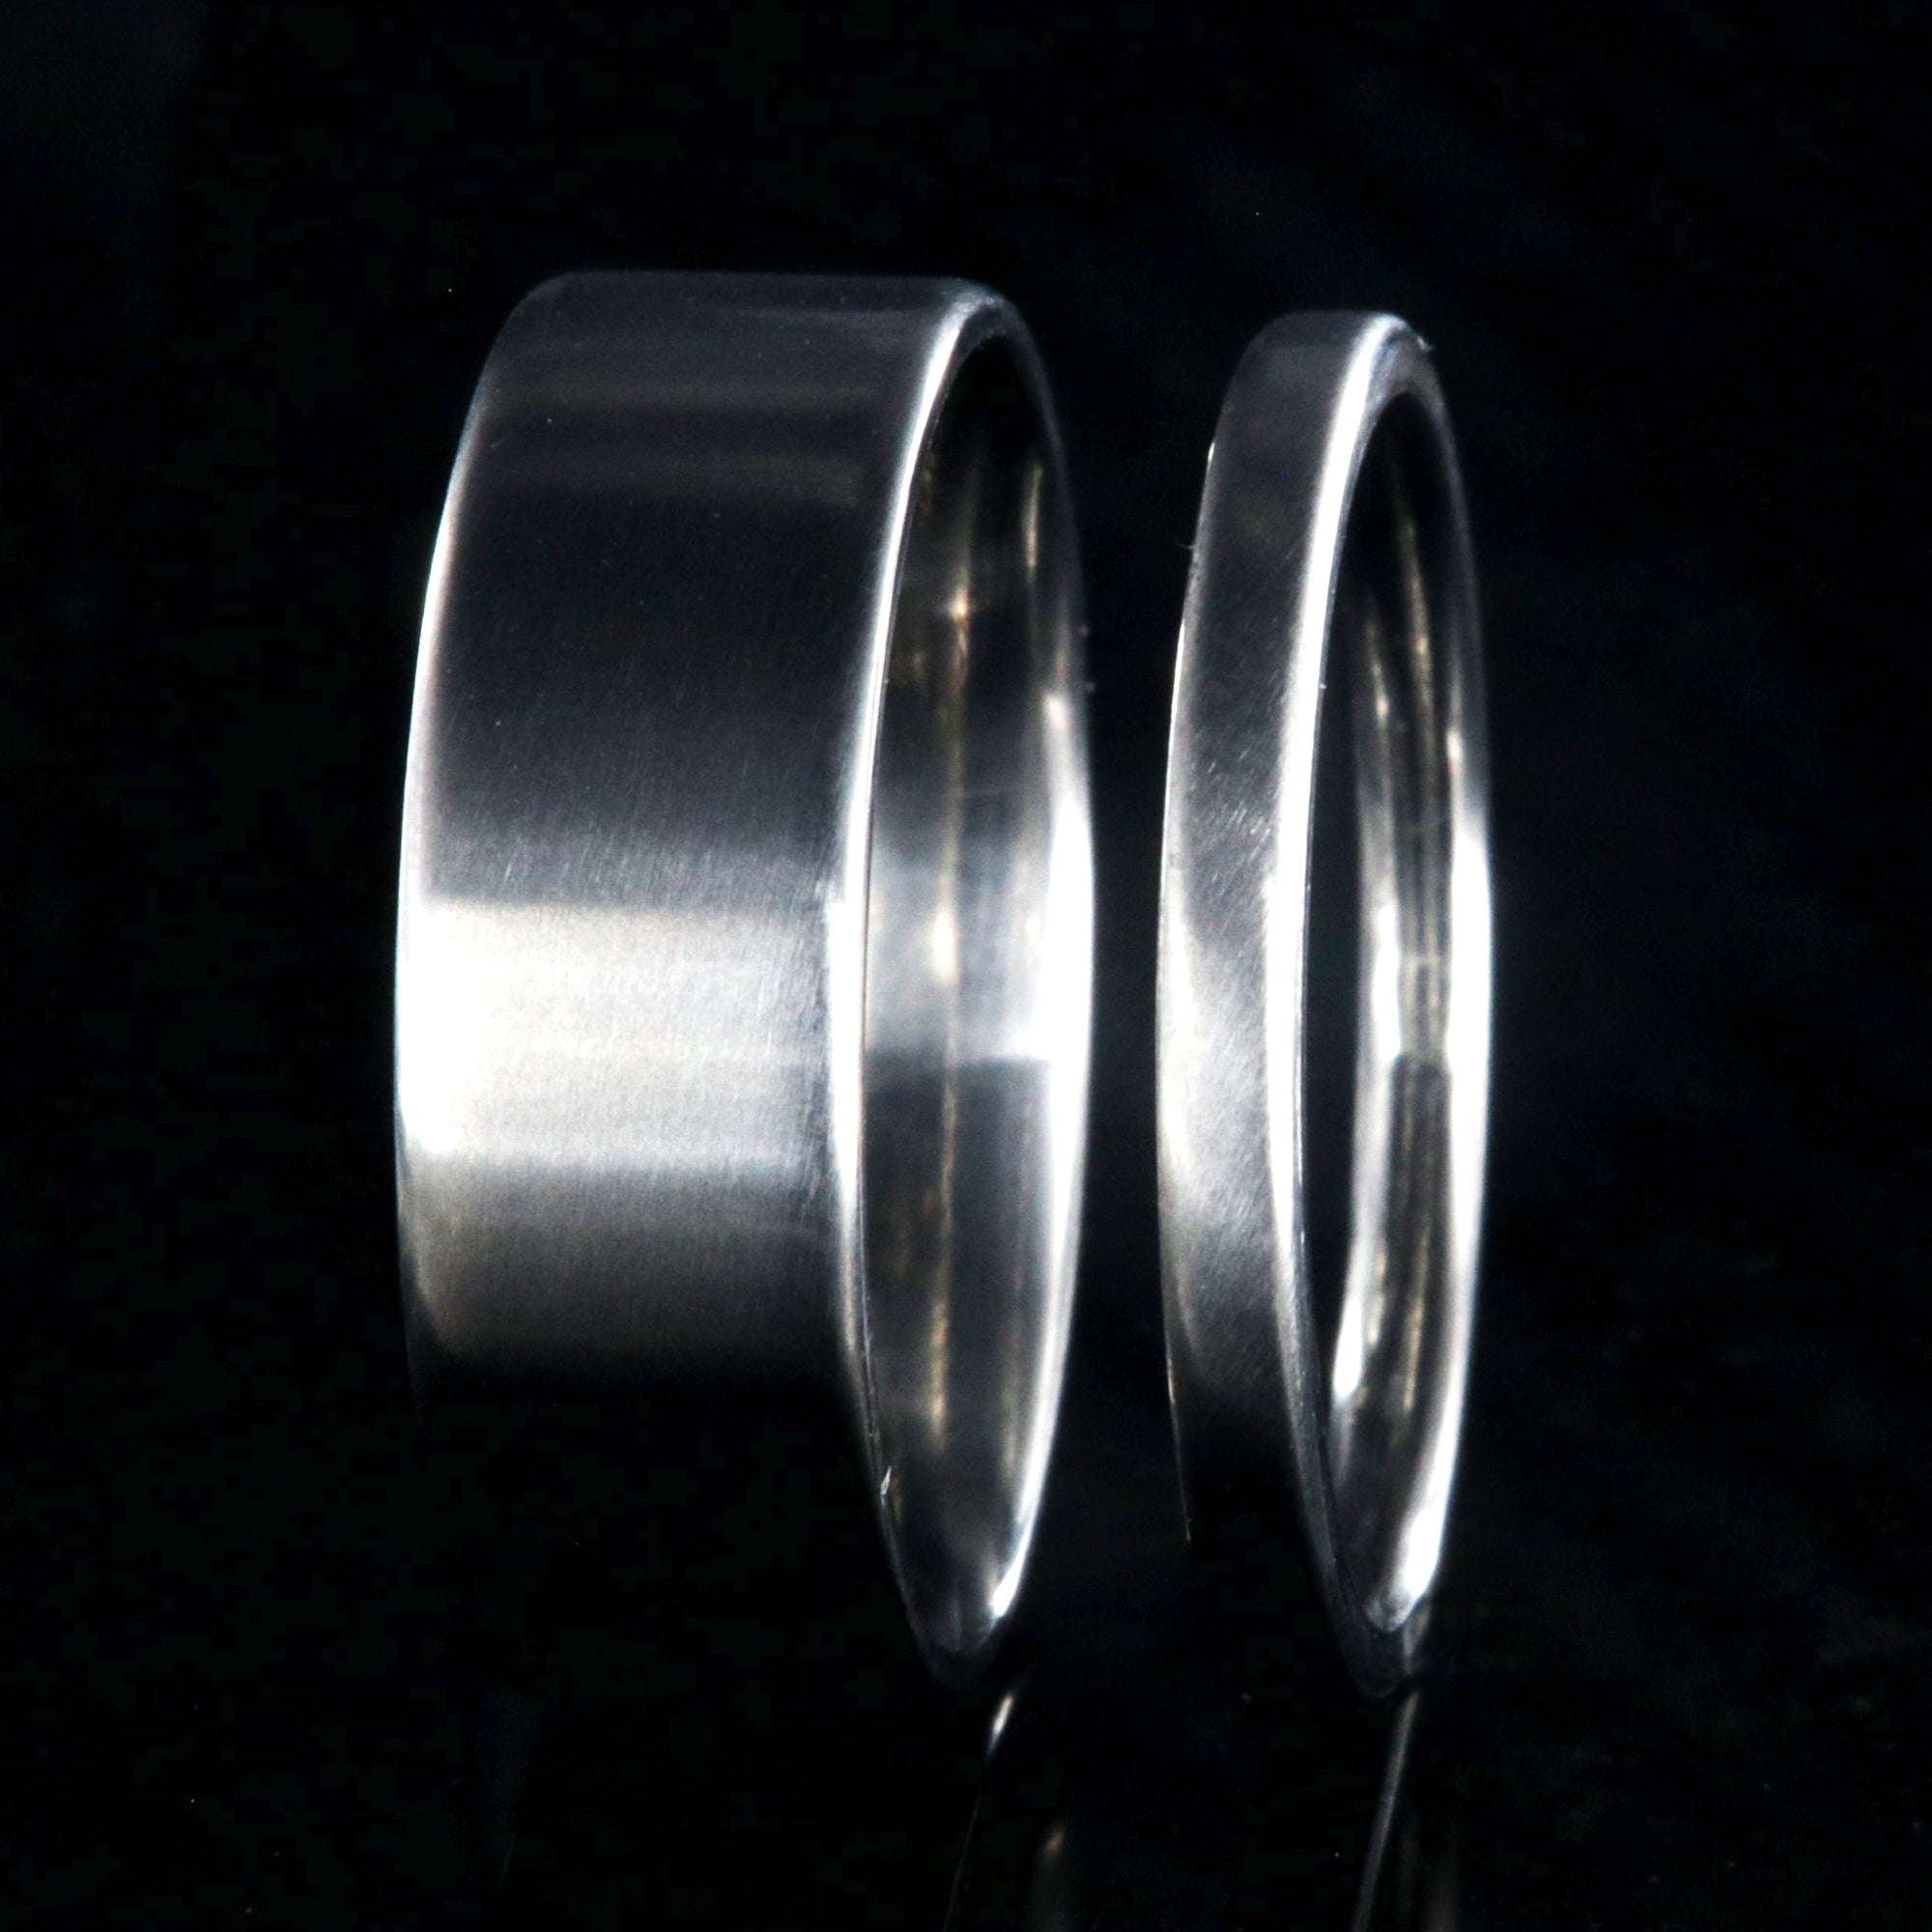 7mm and 2mm wide matching titanium wedding band set with a flat profile